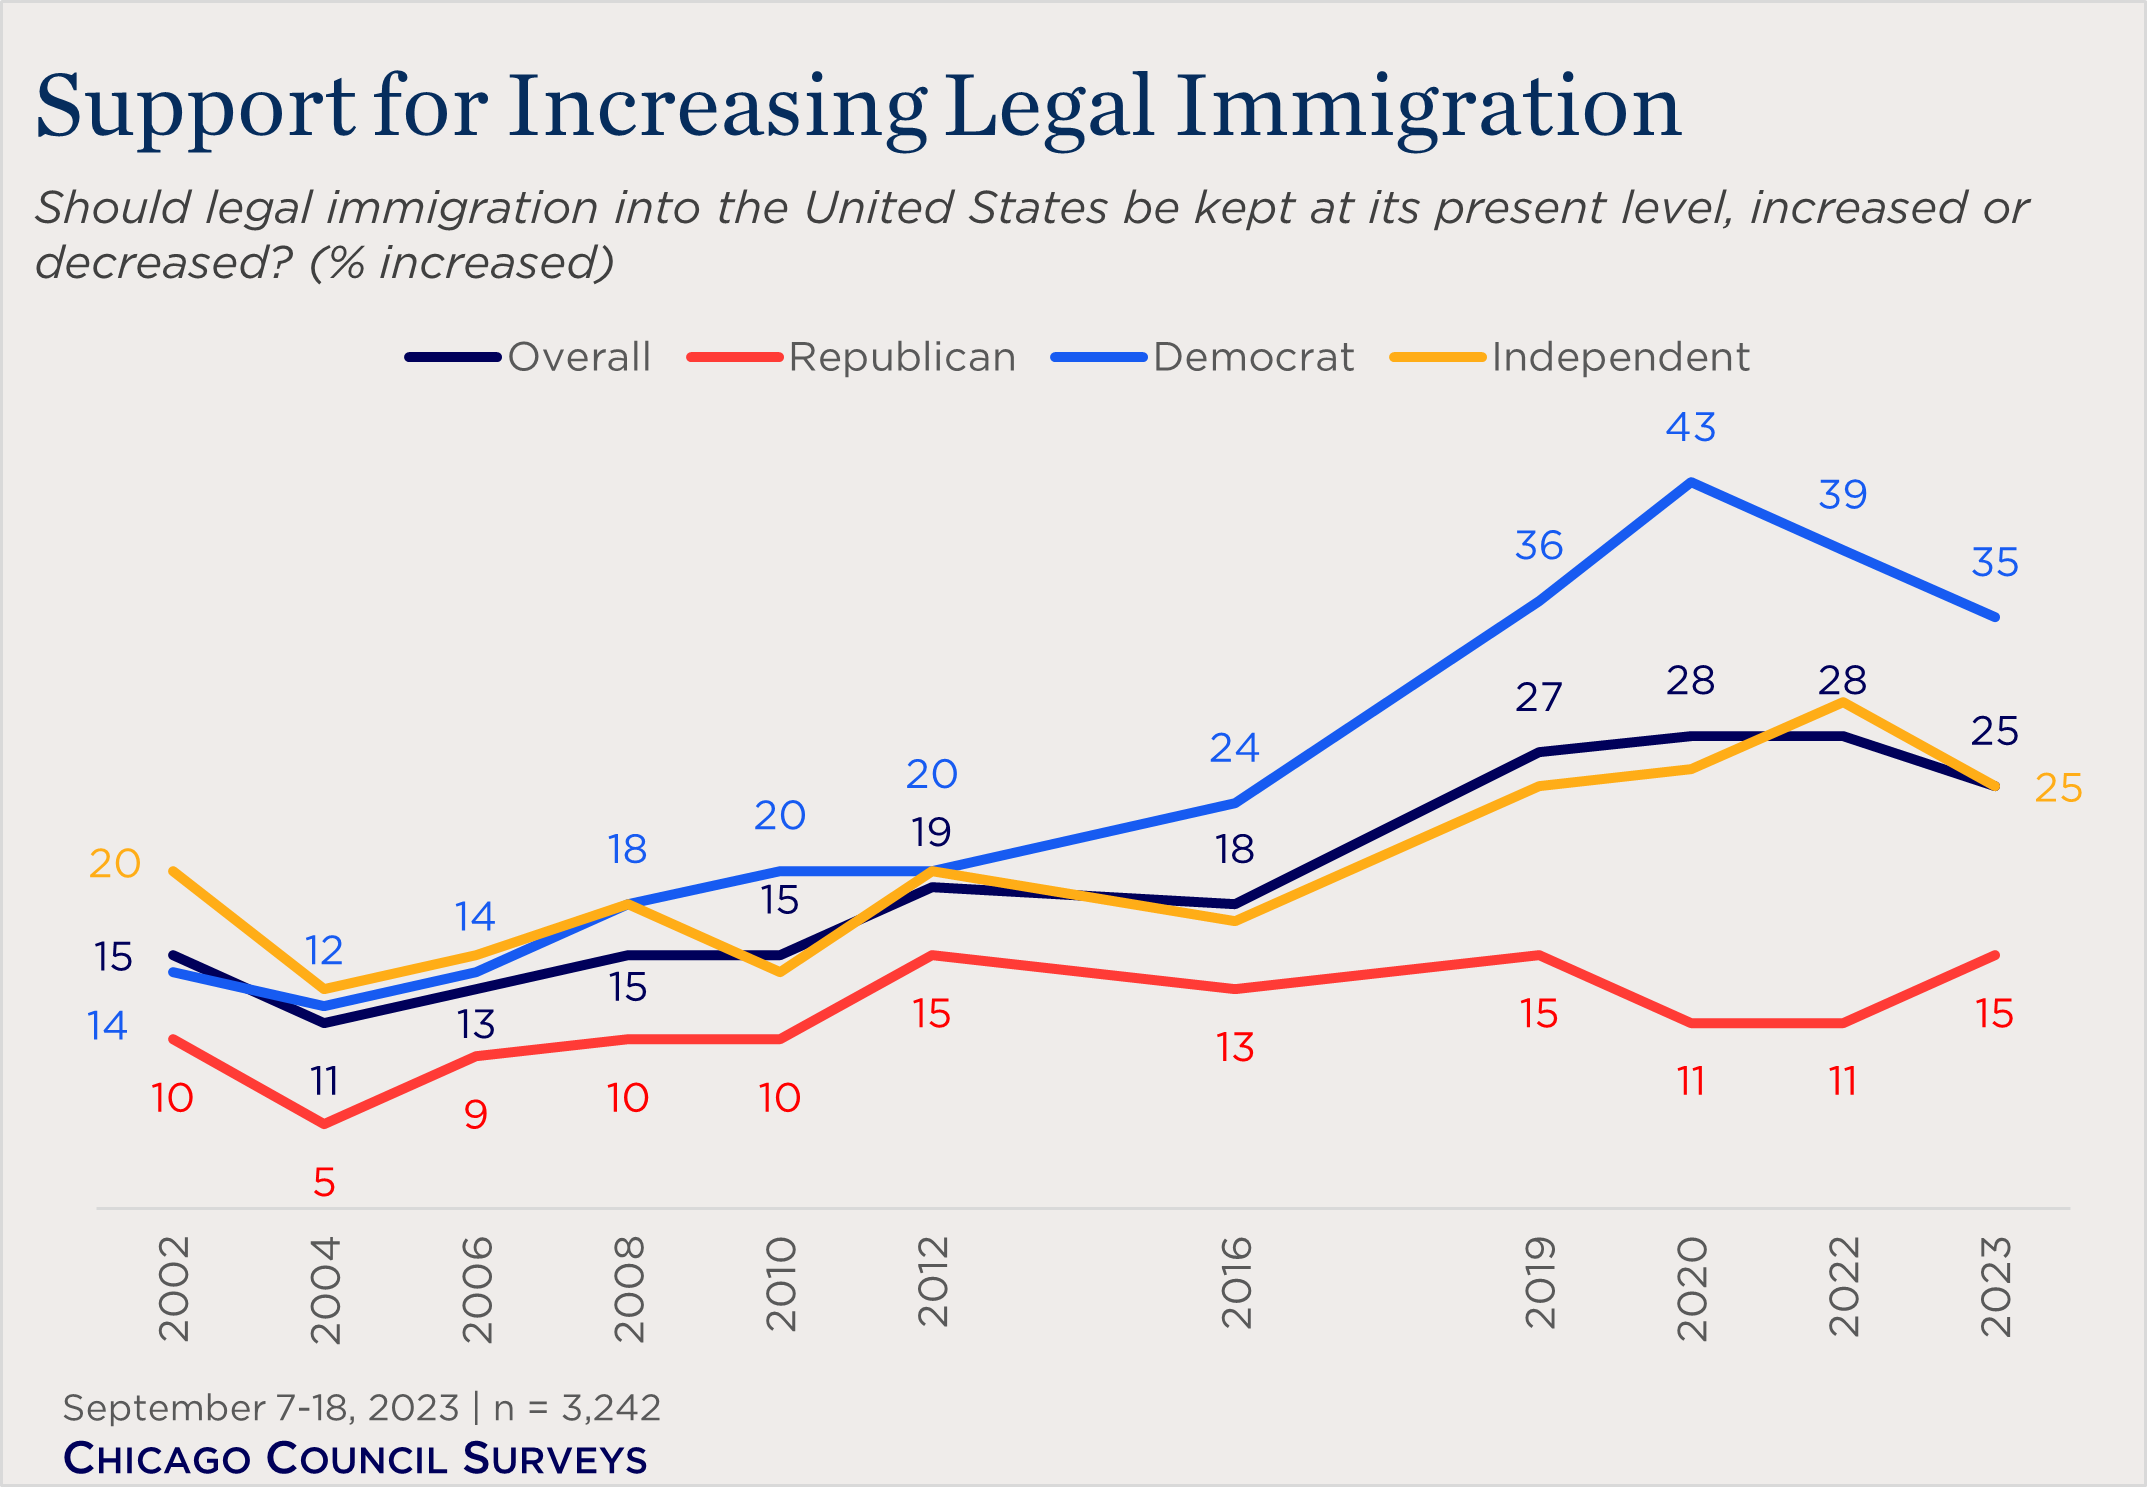 "line chart showing support for increasing immigration levels"